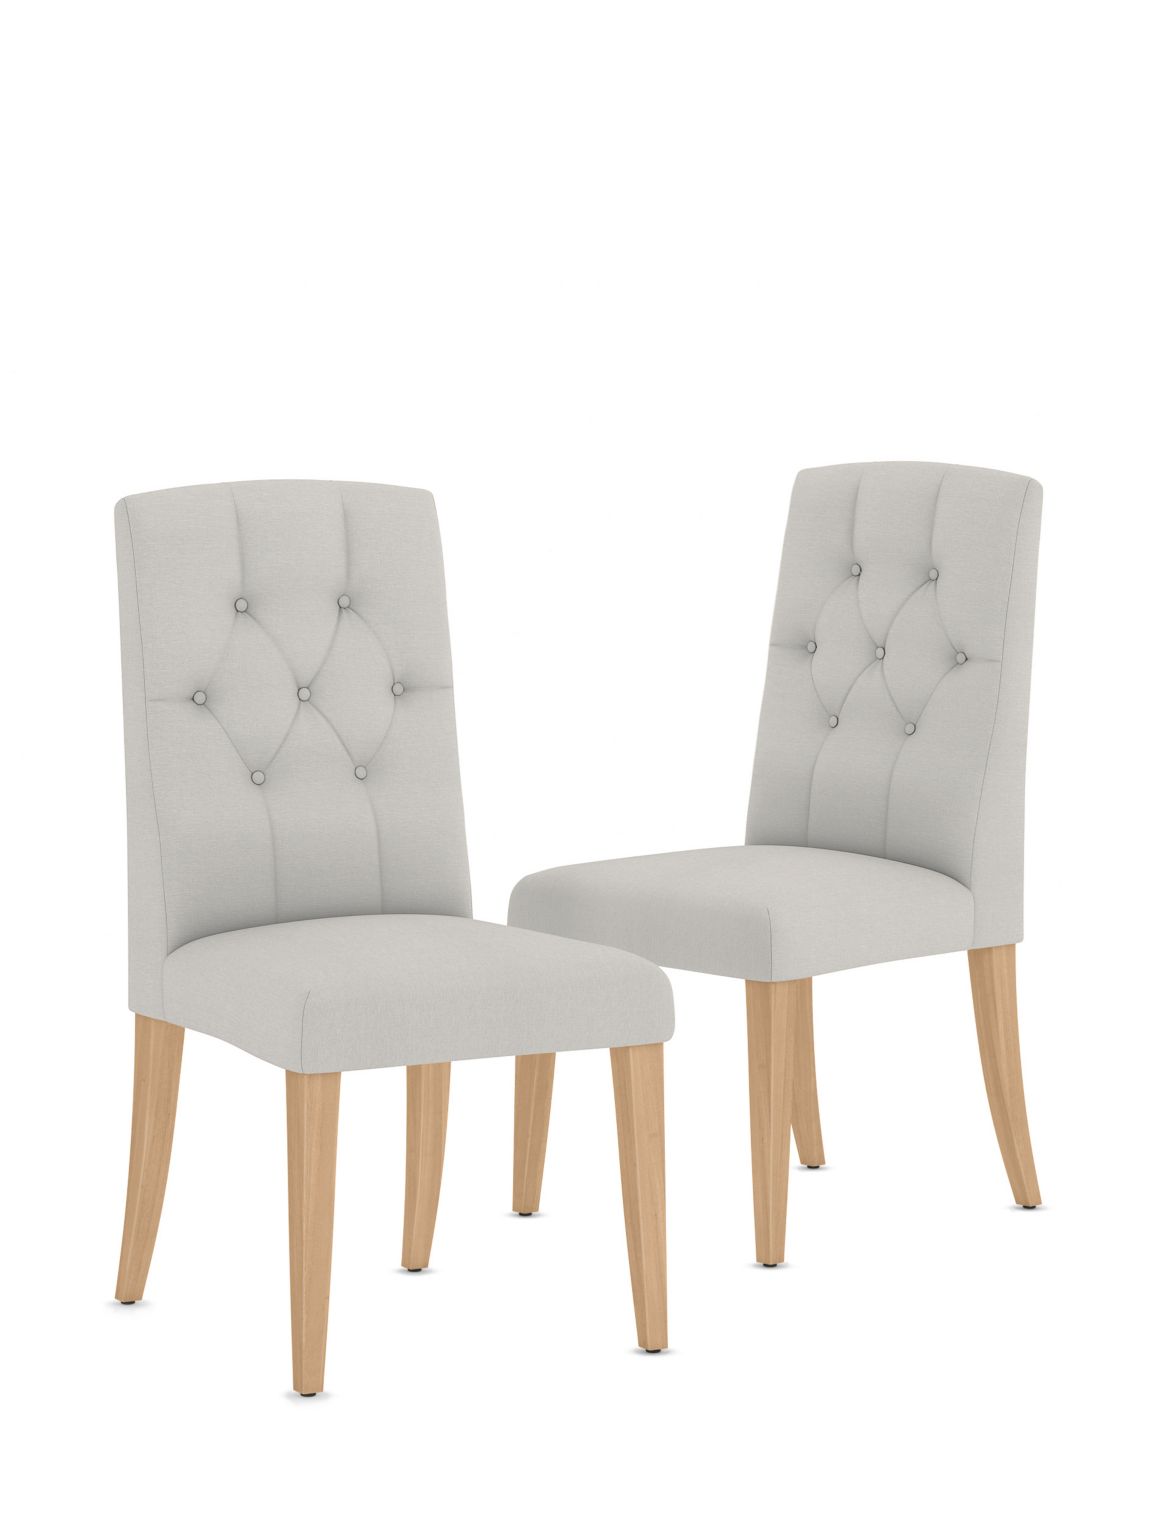 Set of 2 Button Back Dining Chairs beige